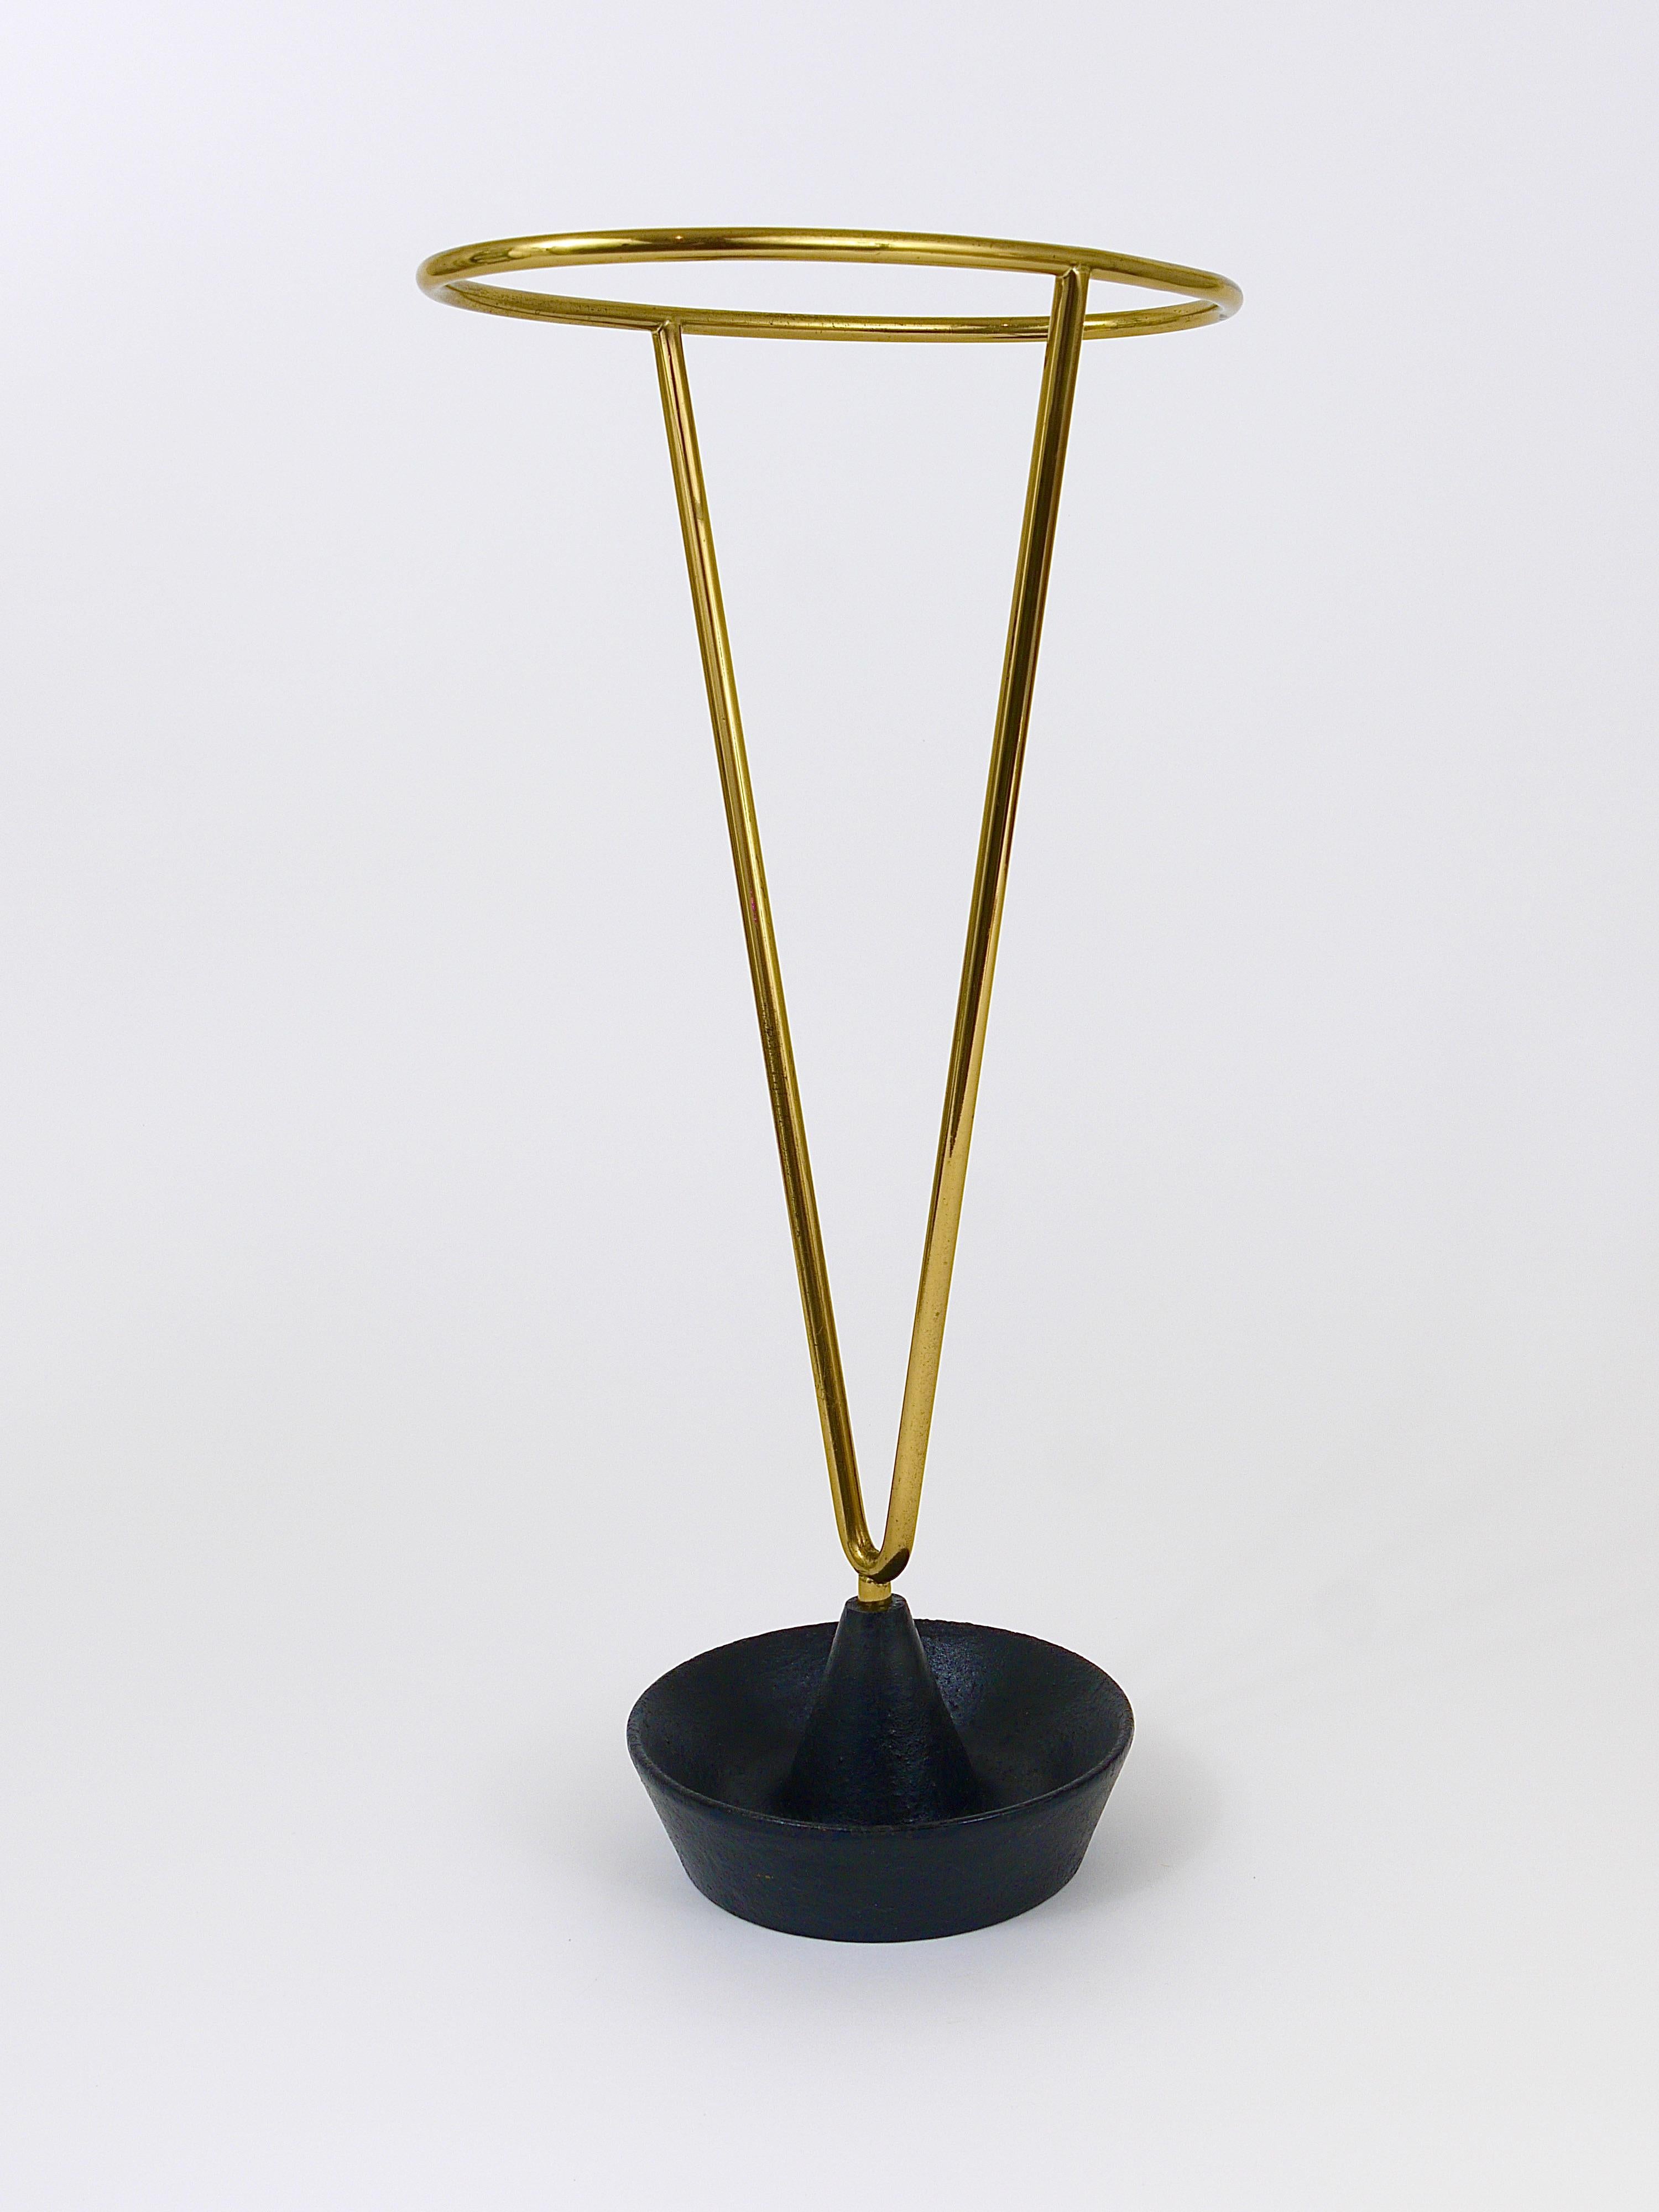 Carl Auböck Mid-Century Brass and Cast Iron Umbrella Stand, Austria, 1950s For Sale 6